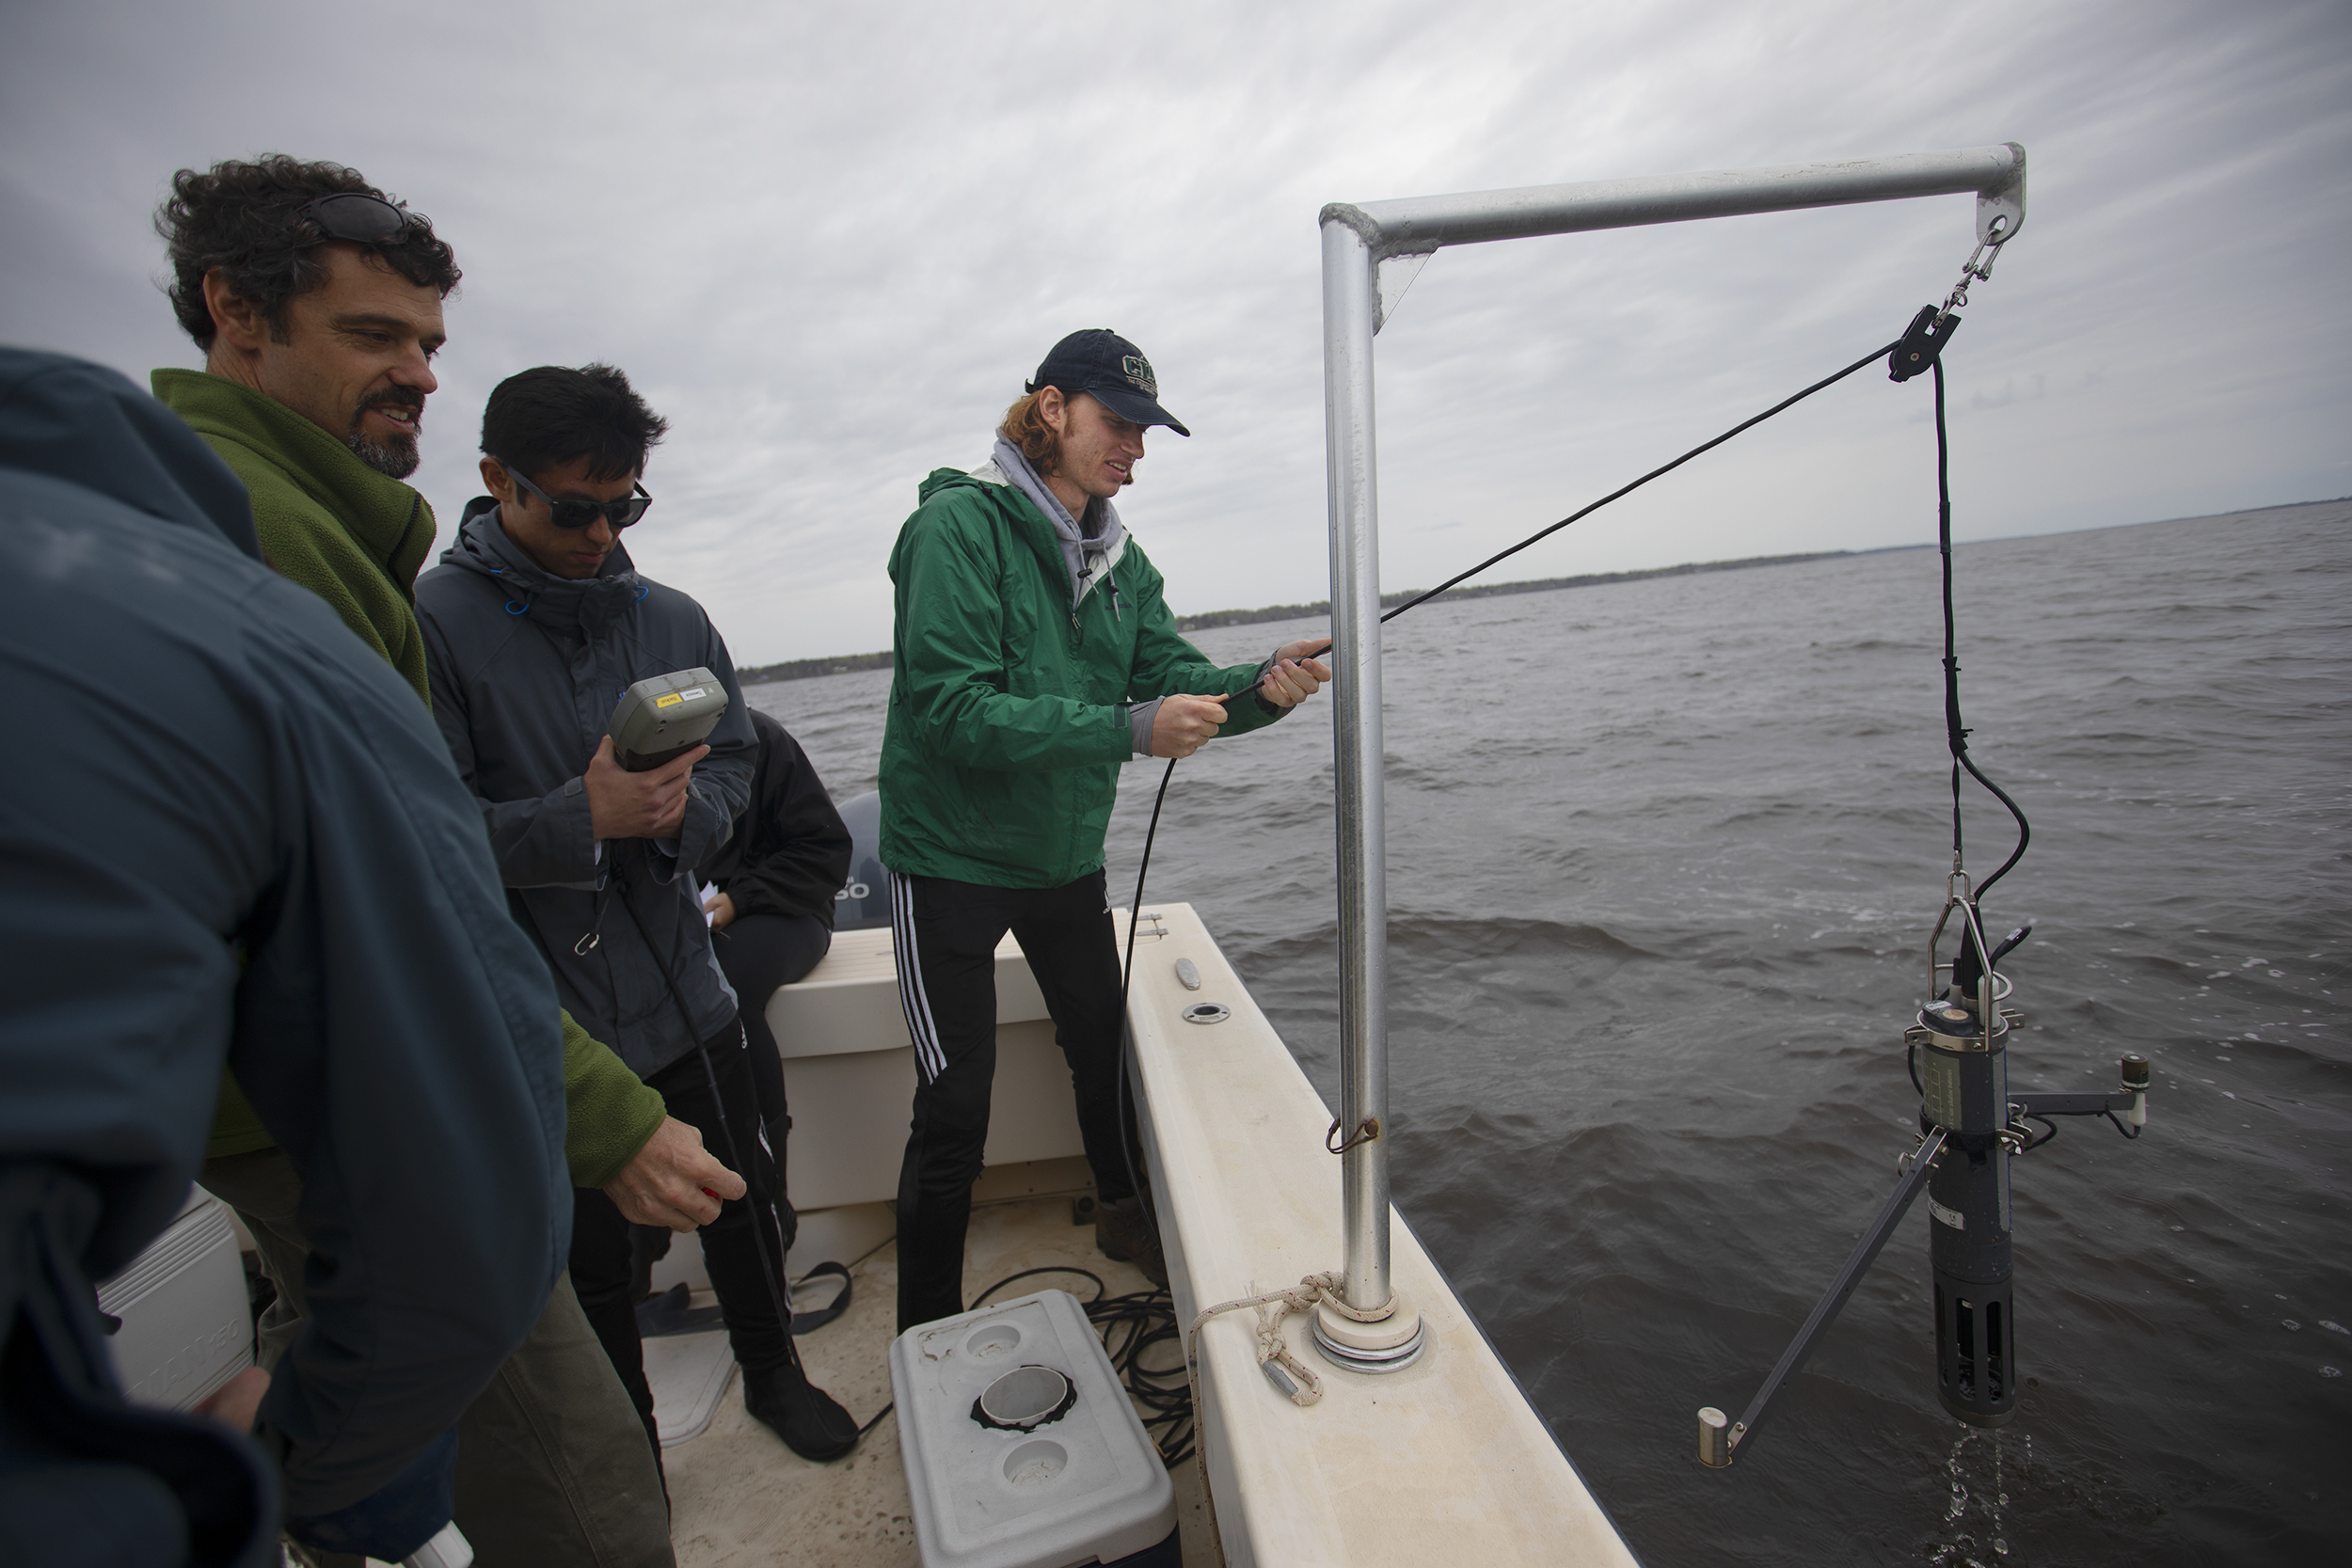 A student stands next to the edge of the boat and uses a pulley system to raise a metal instrument from the estuary water.